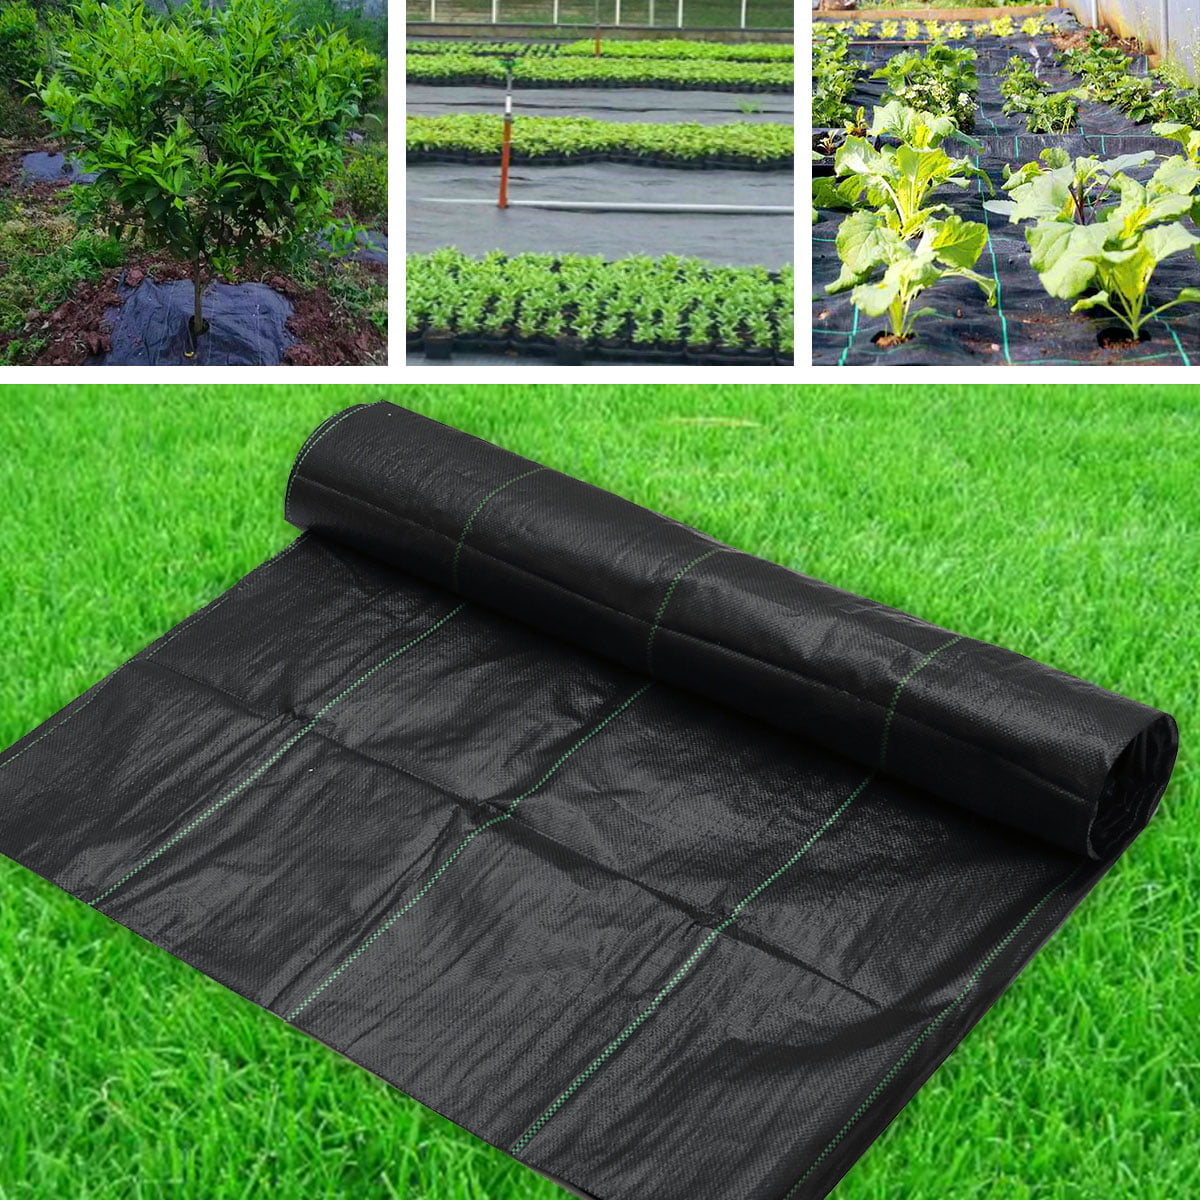 1m/2m Wide Heavy Duty Weed Control Fabric Ground Cover Garden Membrane Mulch 